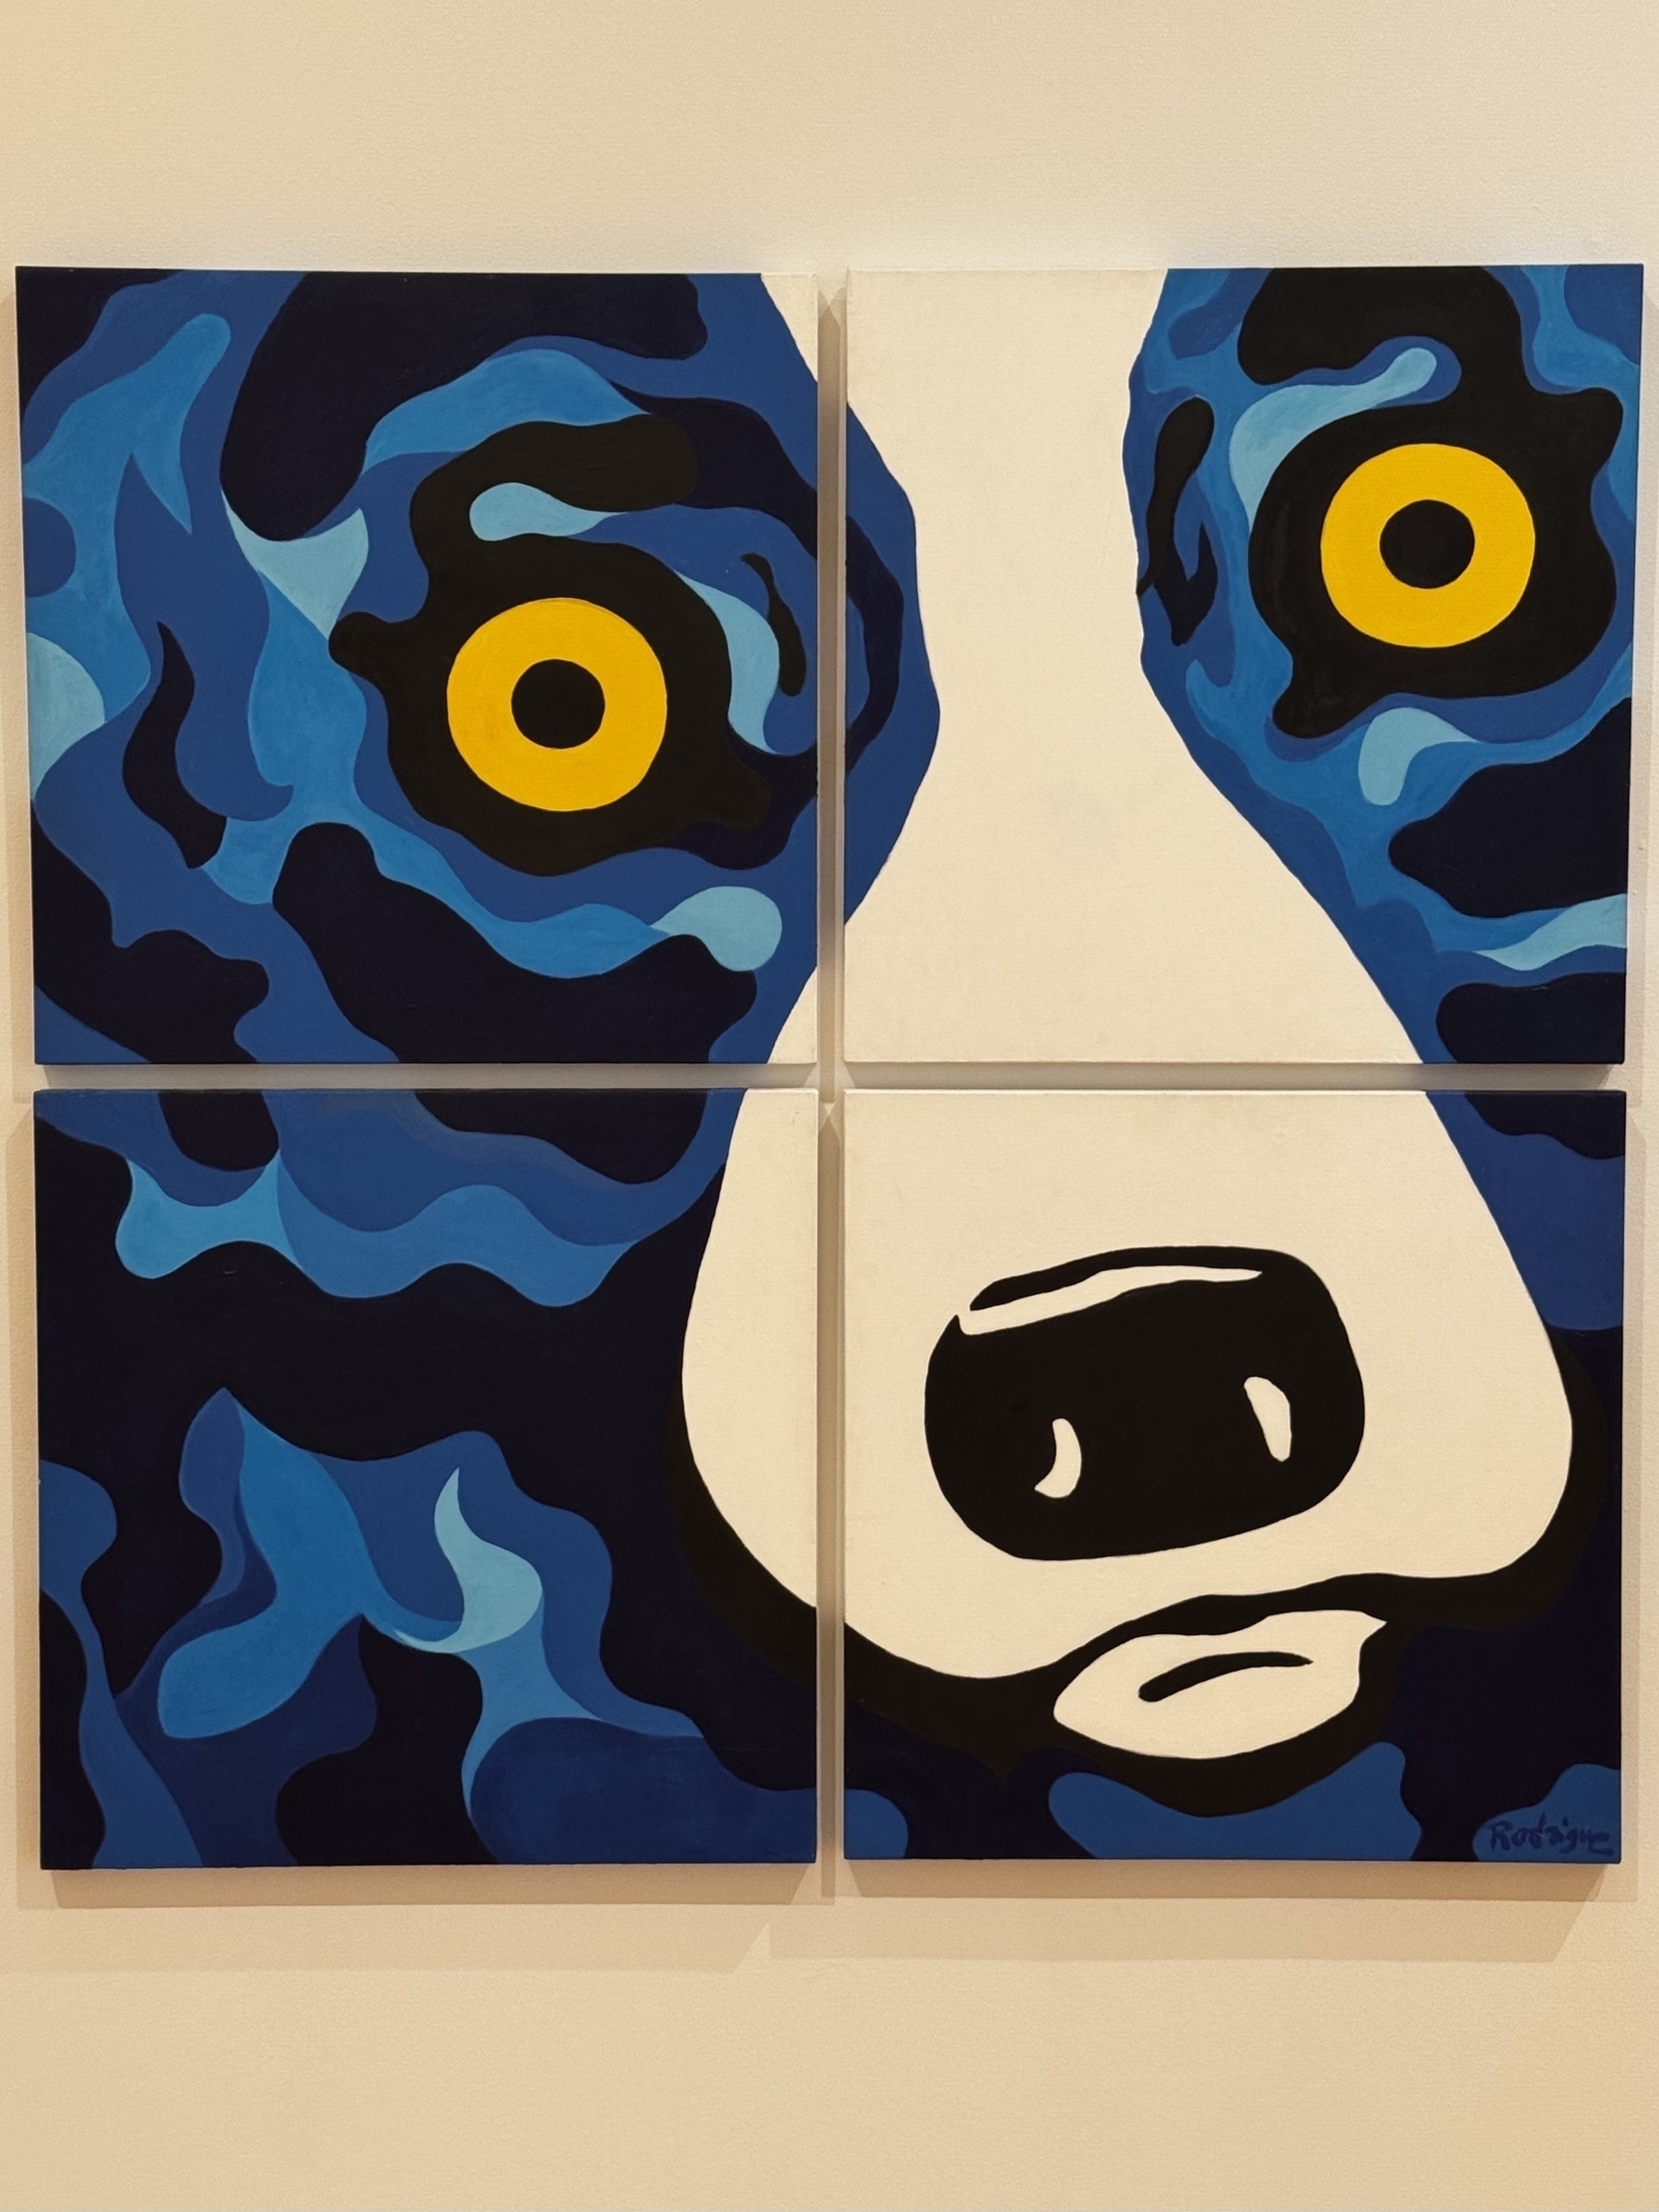 A four-panel artwork features a stylized close-up of a dog's face with blue and black fur, and striking yellow eyes.